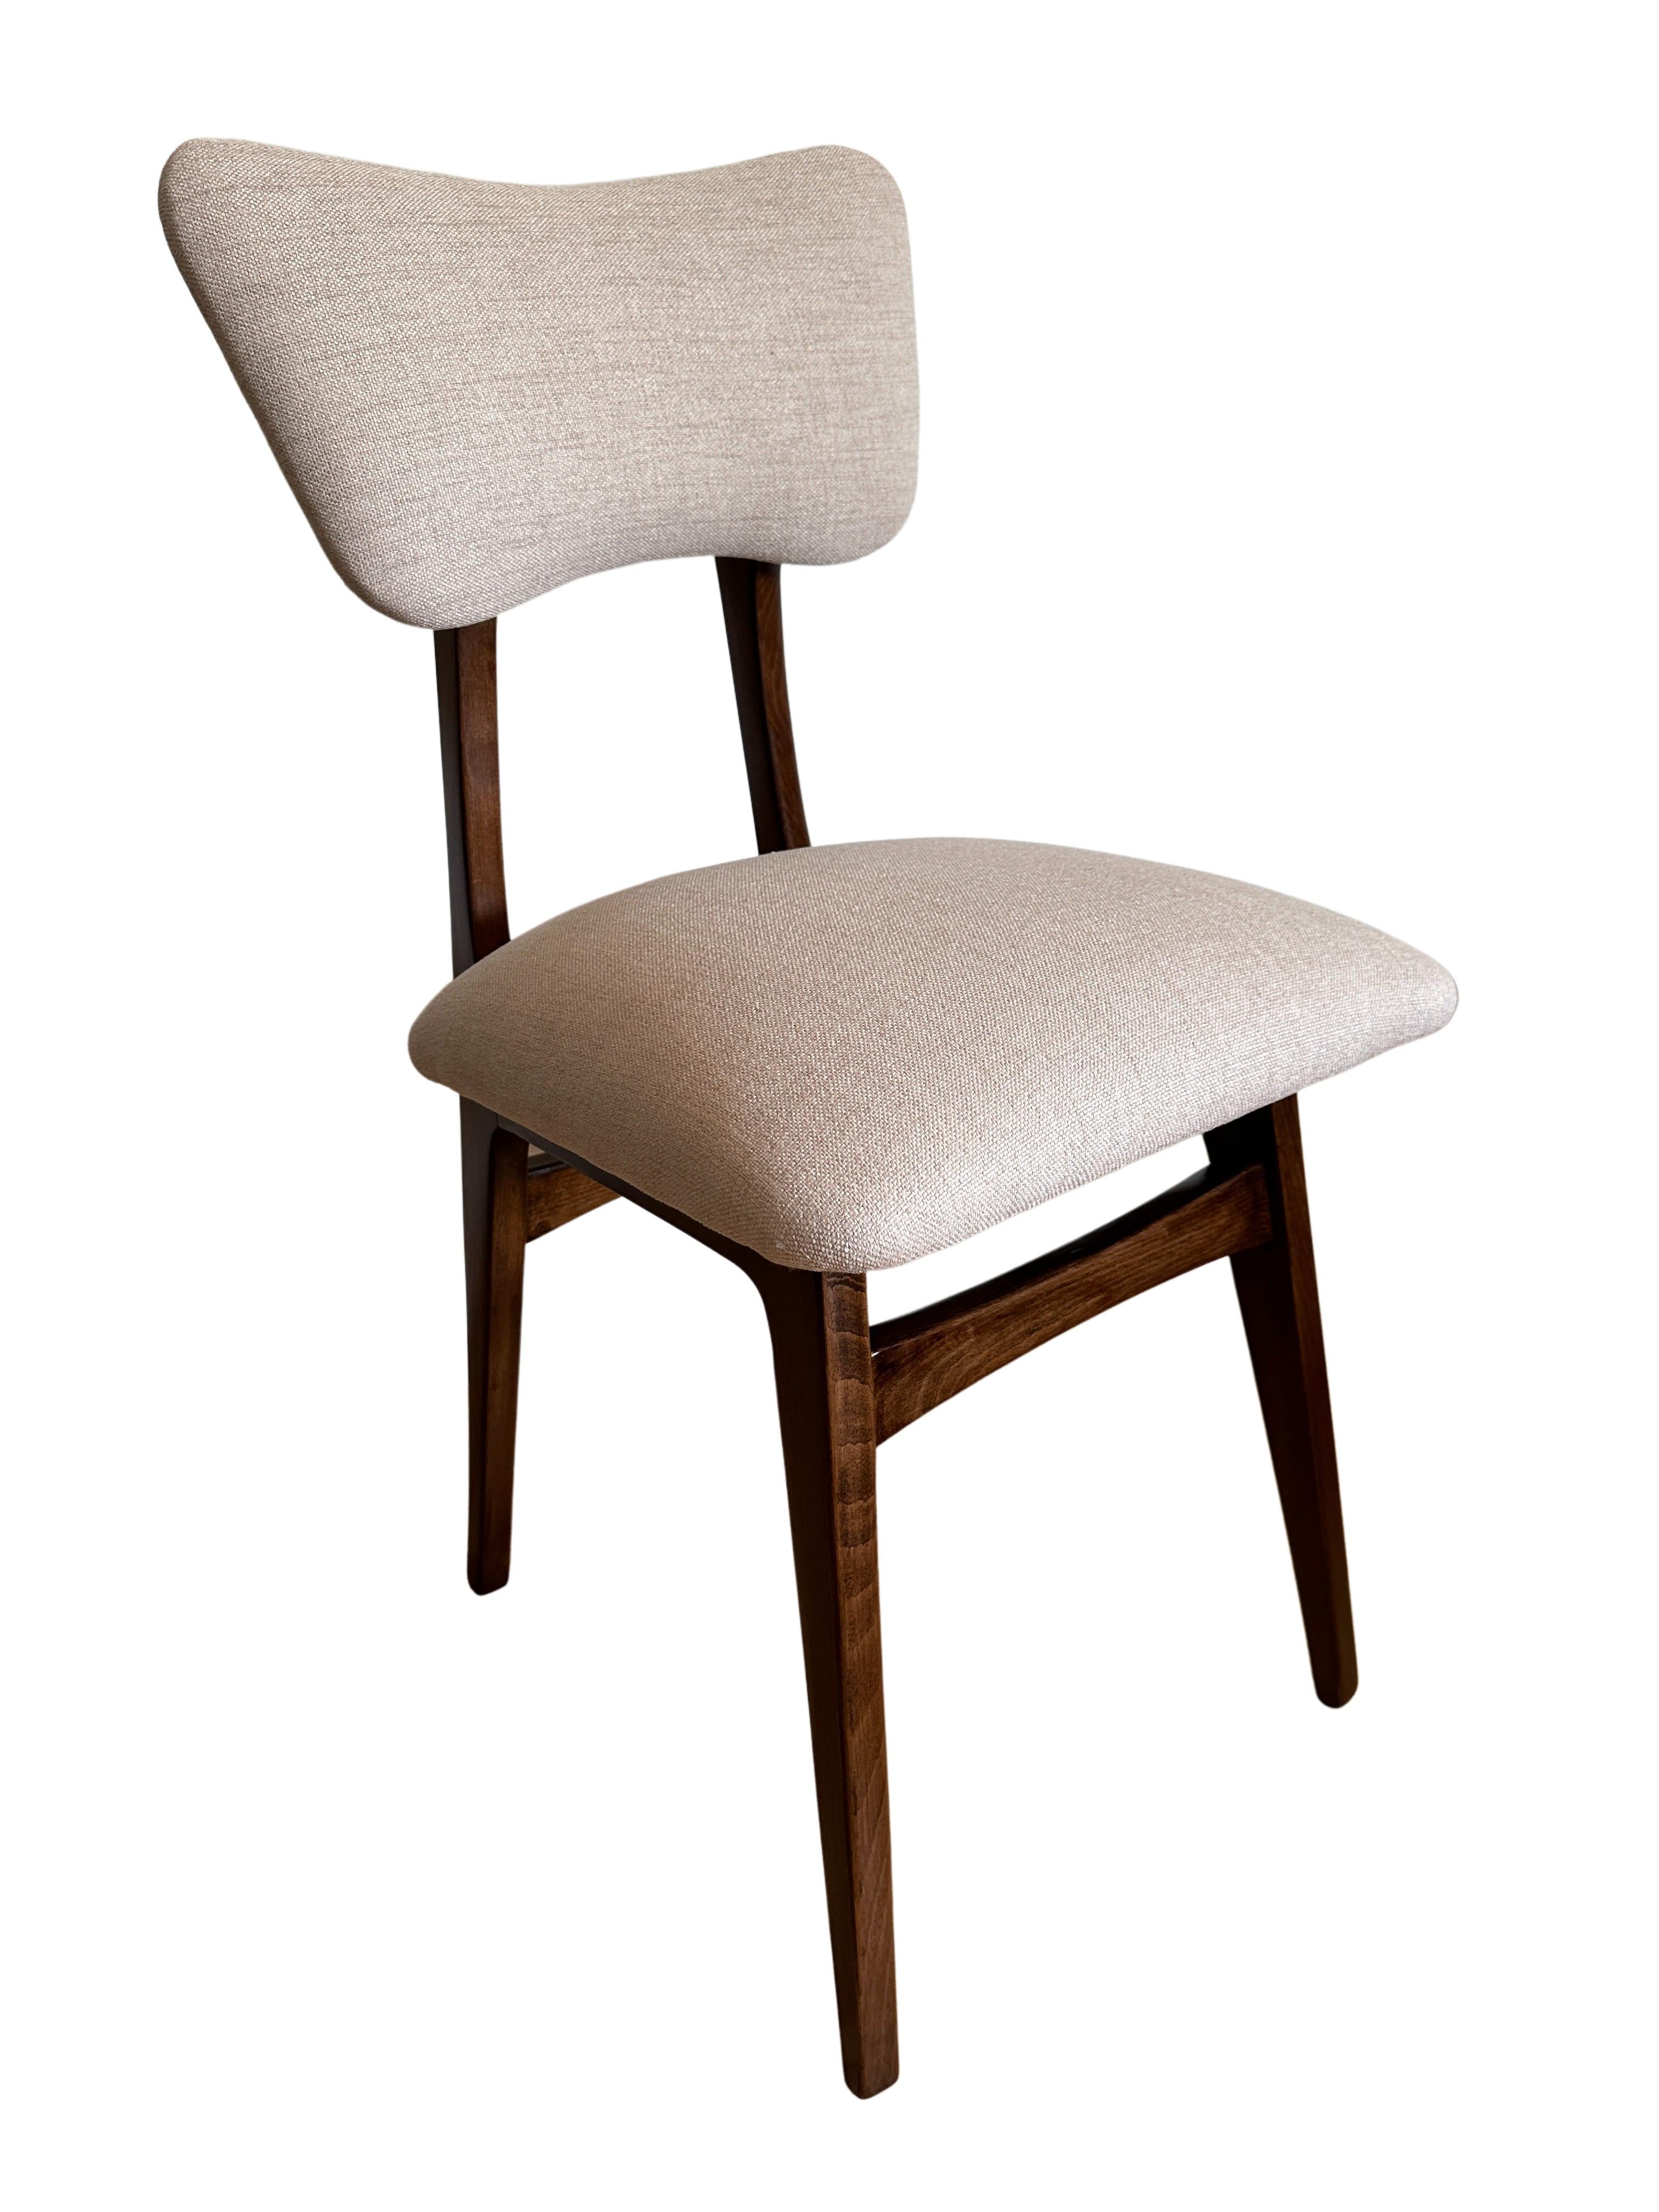 Unique set of six chairs manufactured in Poland in the 1960s, designed by Rajmund Halas. 

The upholstery is made of fabric with an interesting structure of thickly woven canvas, nice and soft to the touch. The fabric is covered with a protective